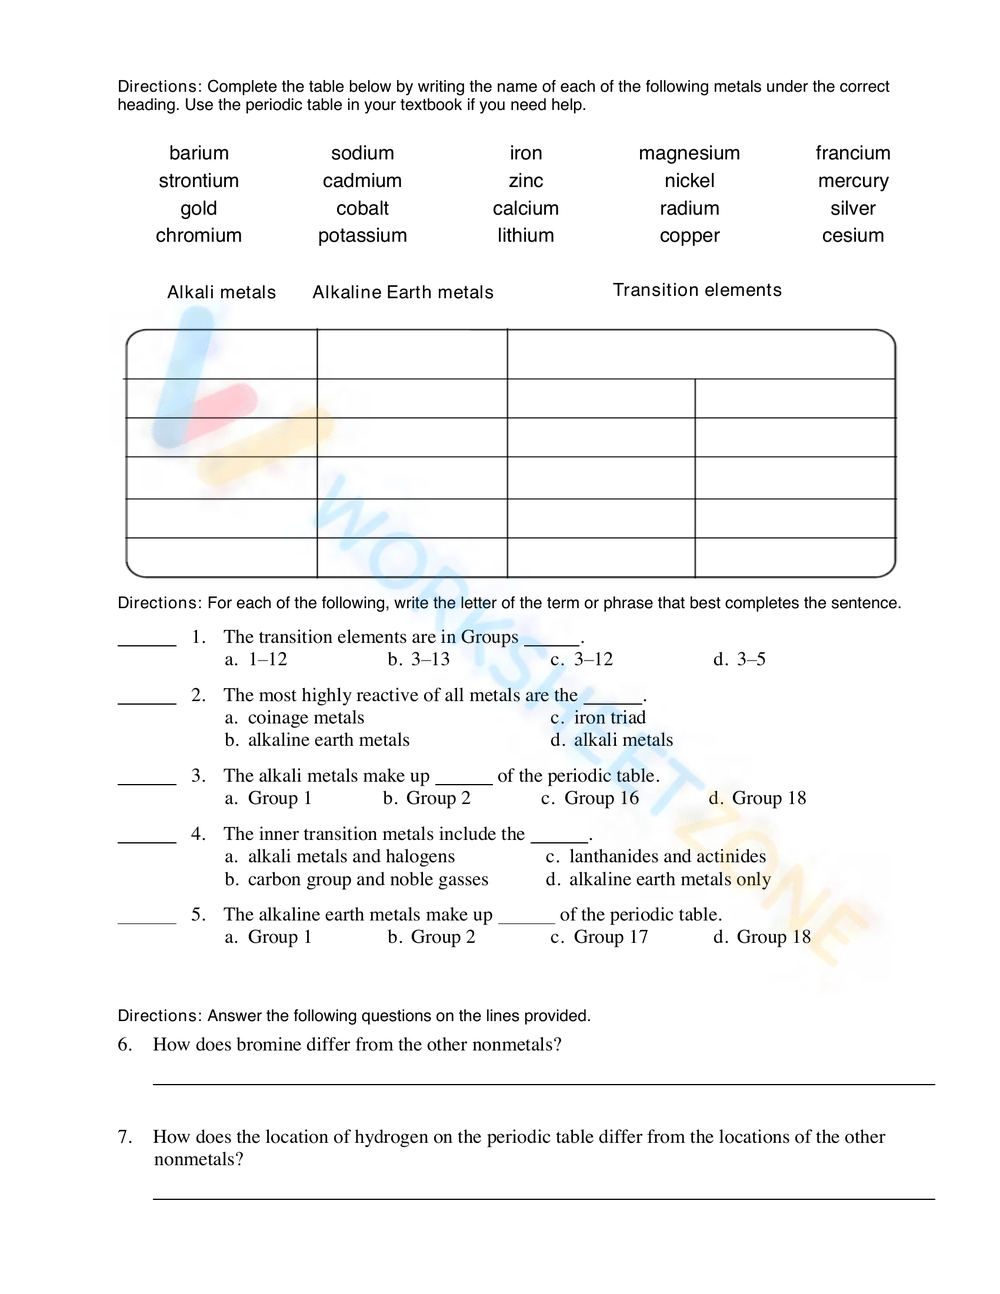 The Prediodic Table - Review worksheet